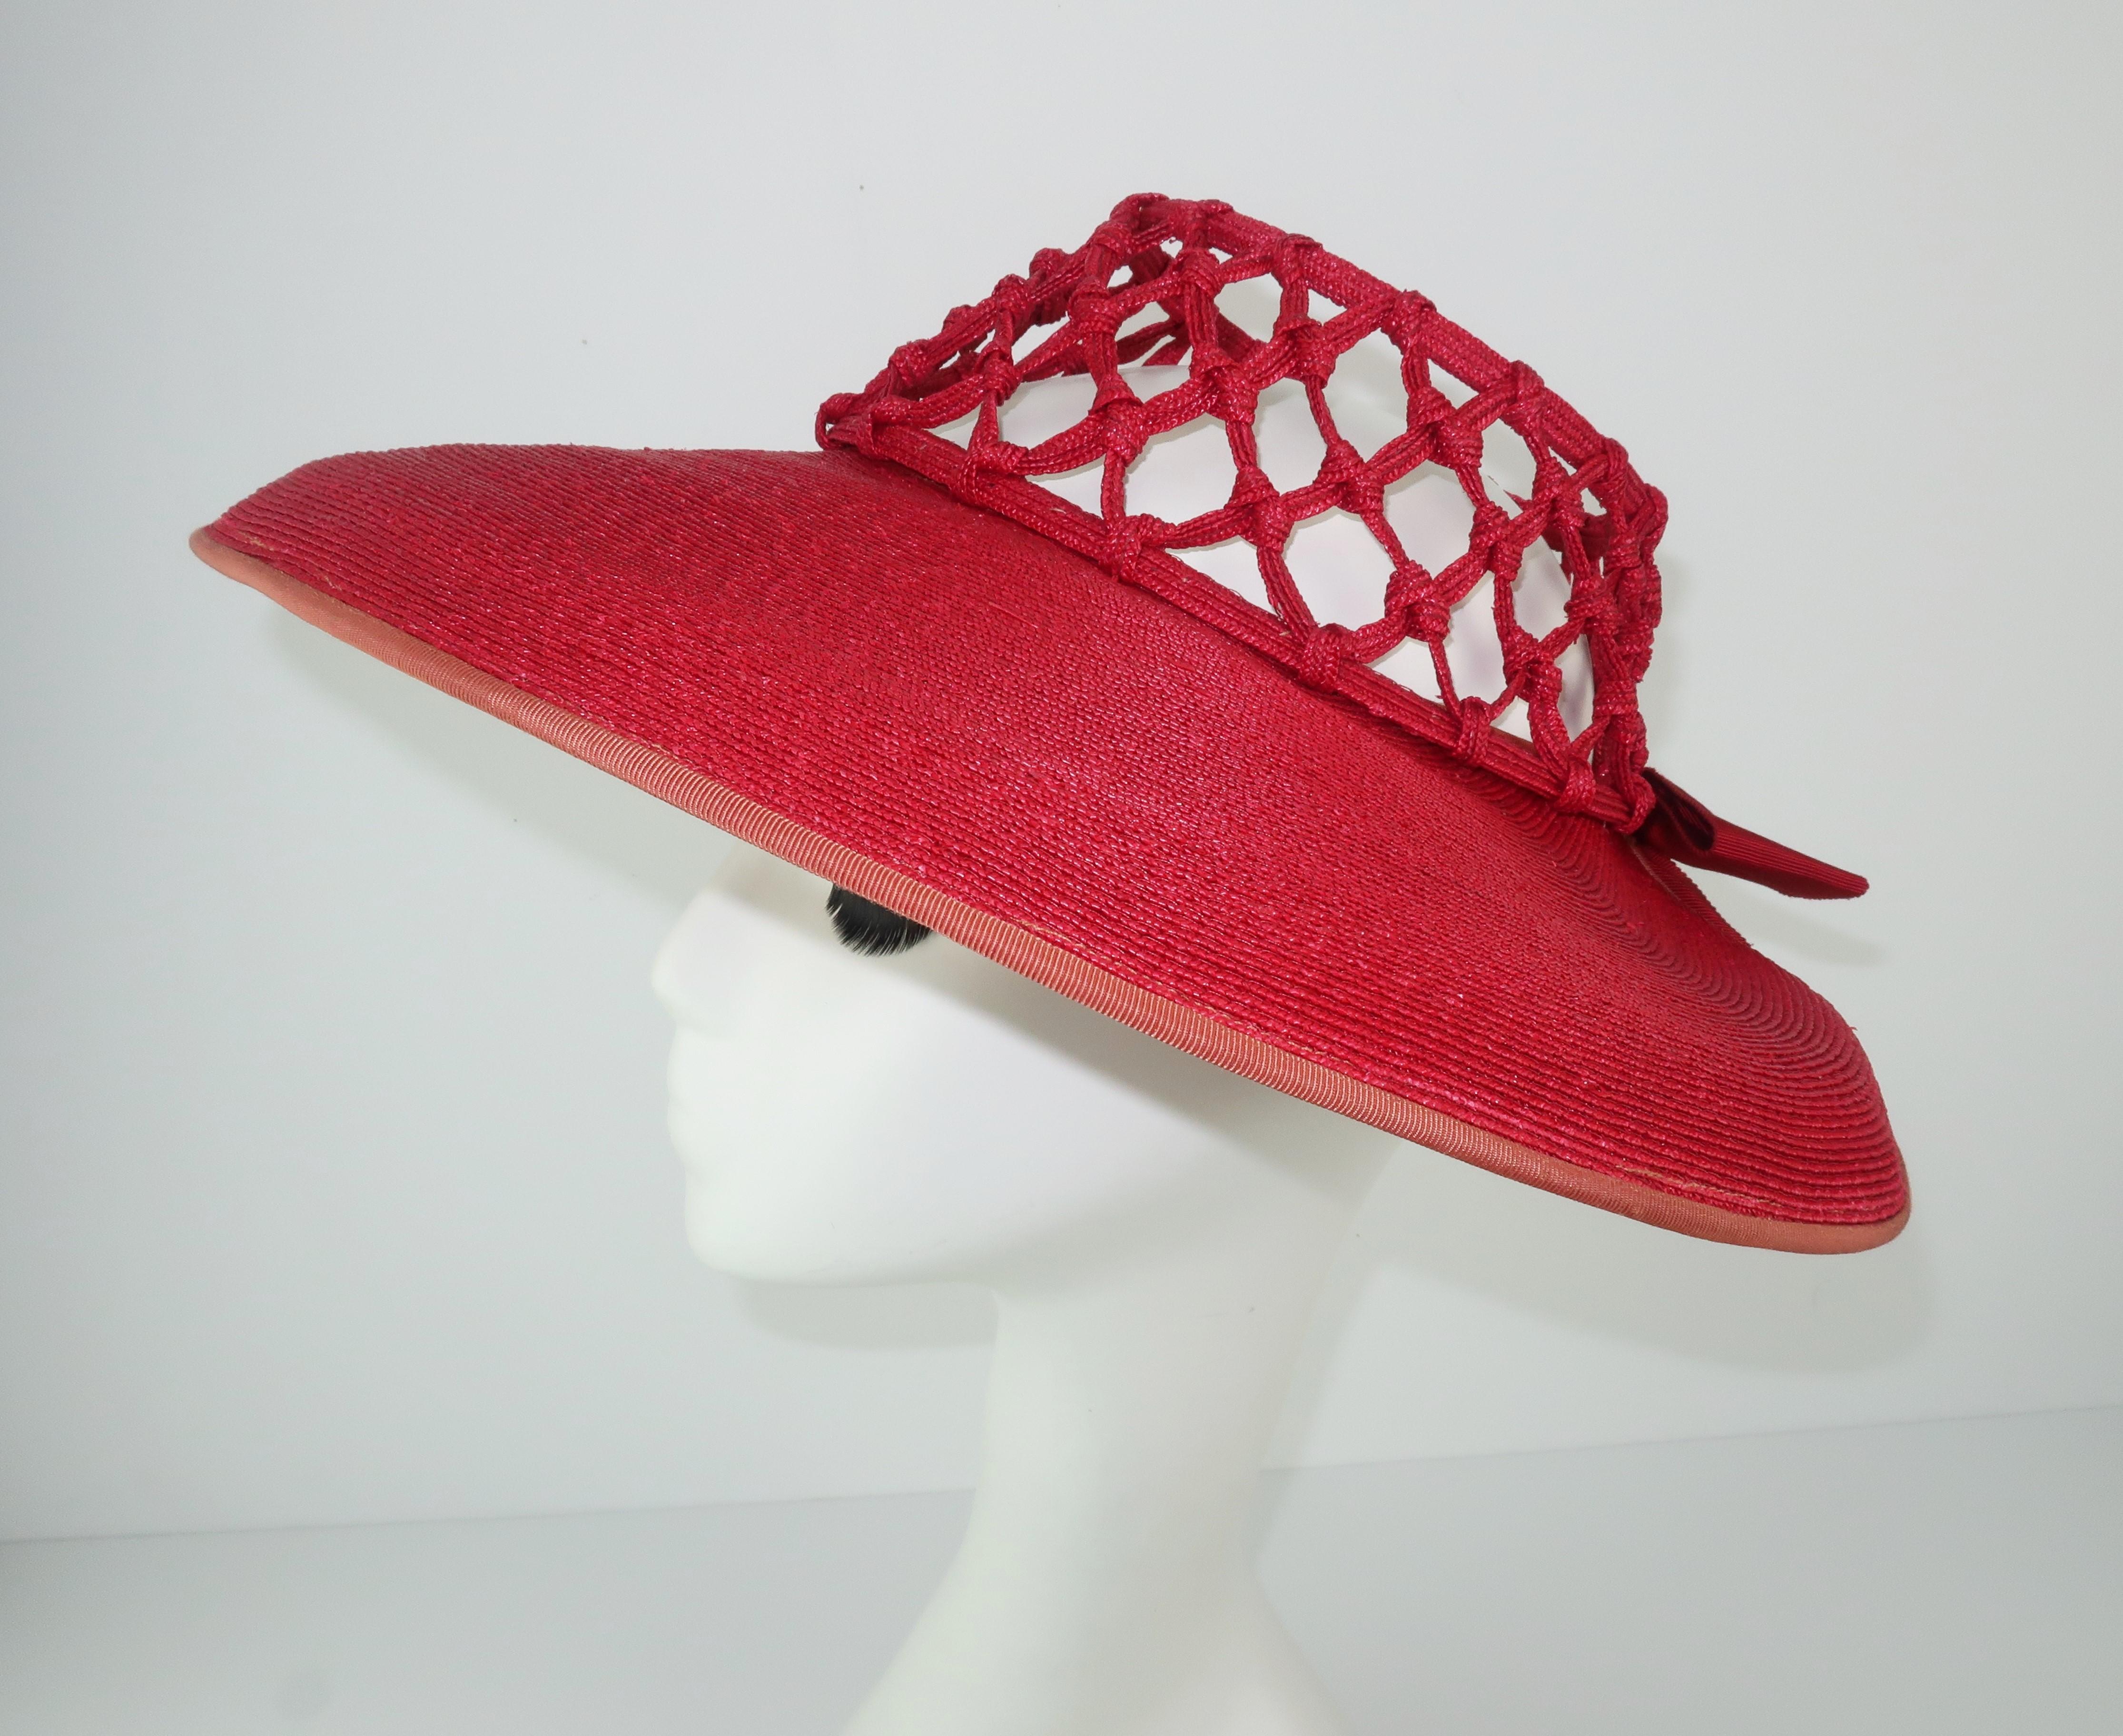 Uber chic 1930's lipstick red straw hat with a unique lattice patterned cage crown providing visual interest and practical ventilation.  The wide brimmed silhouette nips in at the back with a red grosgrain ribbon accent.  A wonderful topper for